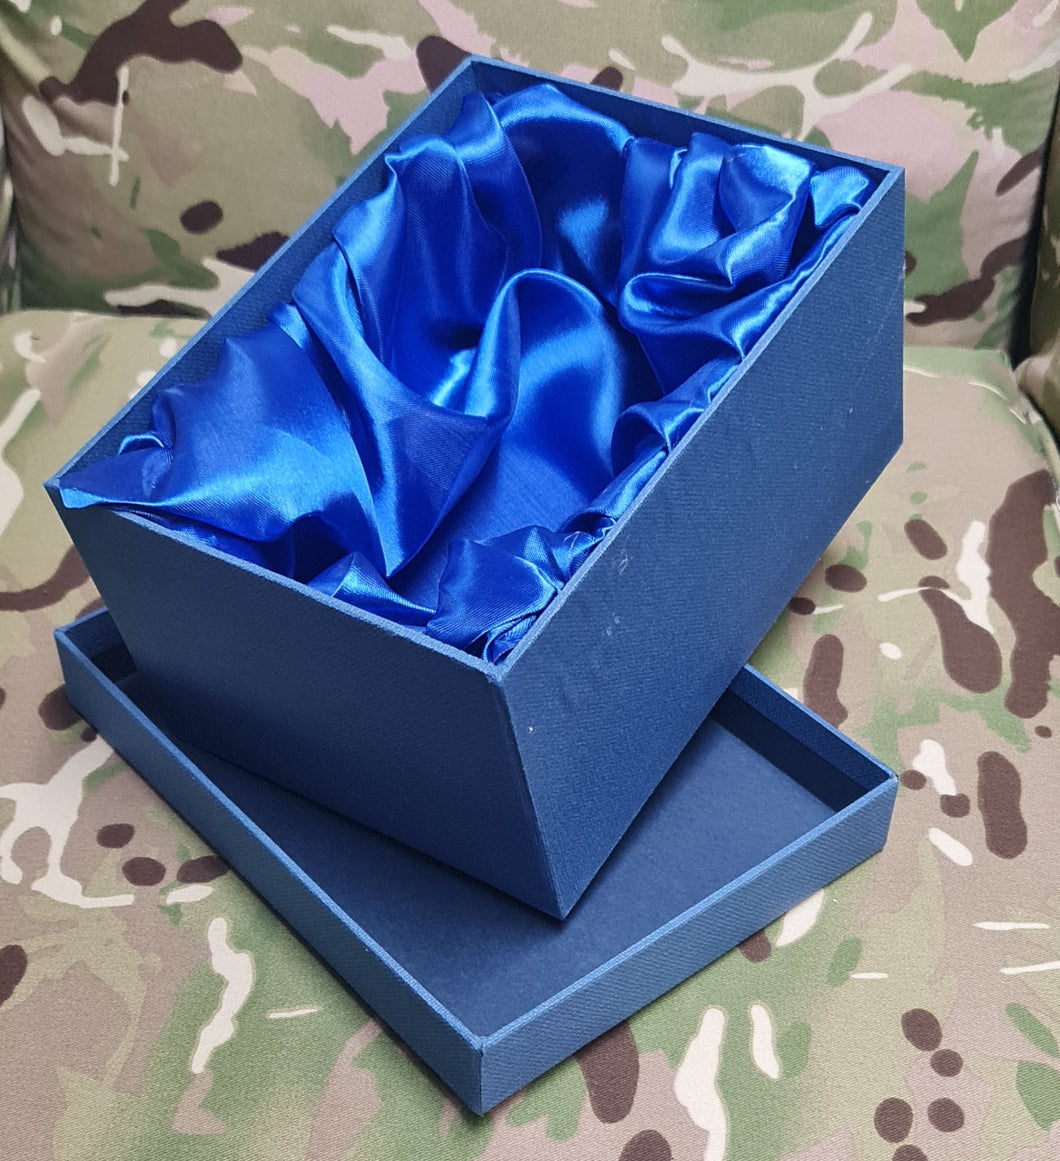 Classic Blue Gift Box With a Blue Satin Lining 21.5X15.5X11.5CM (Short Bottle or Decanter)